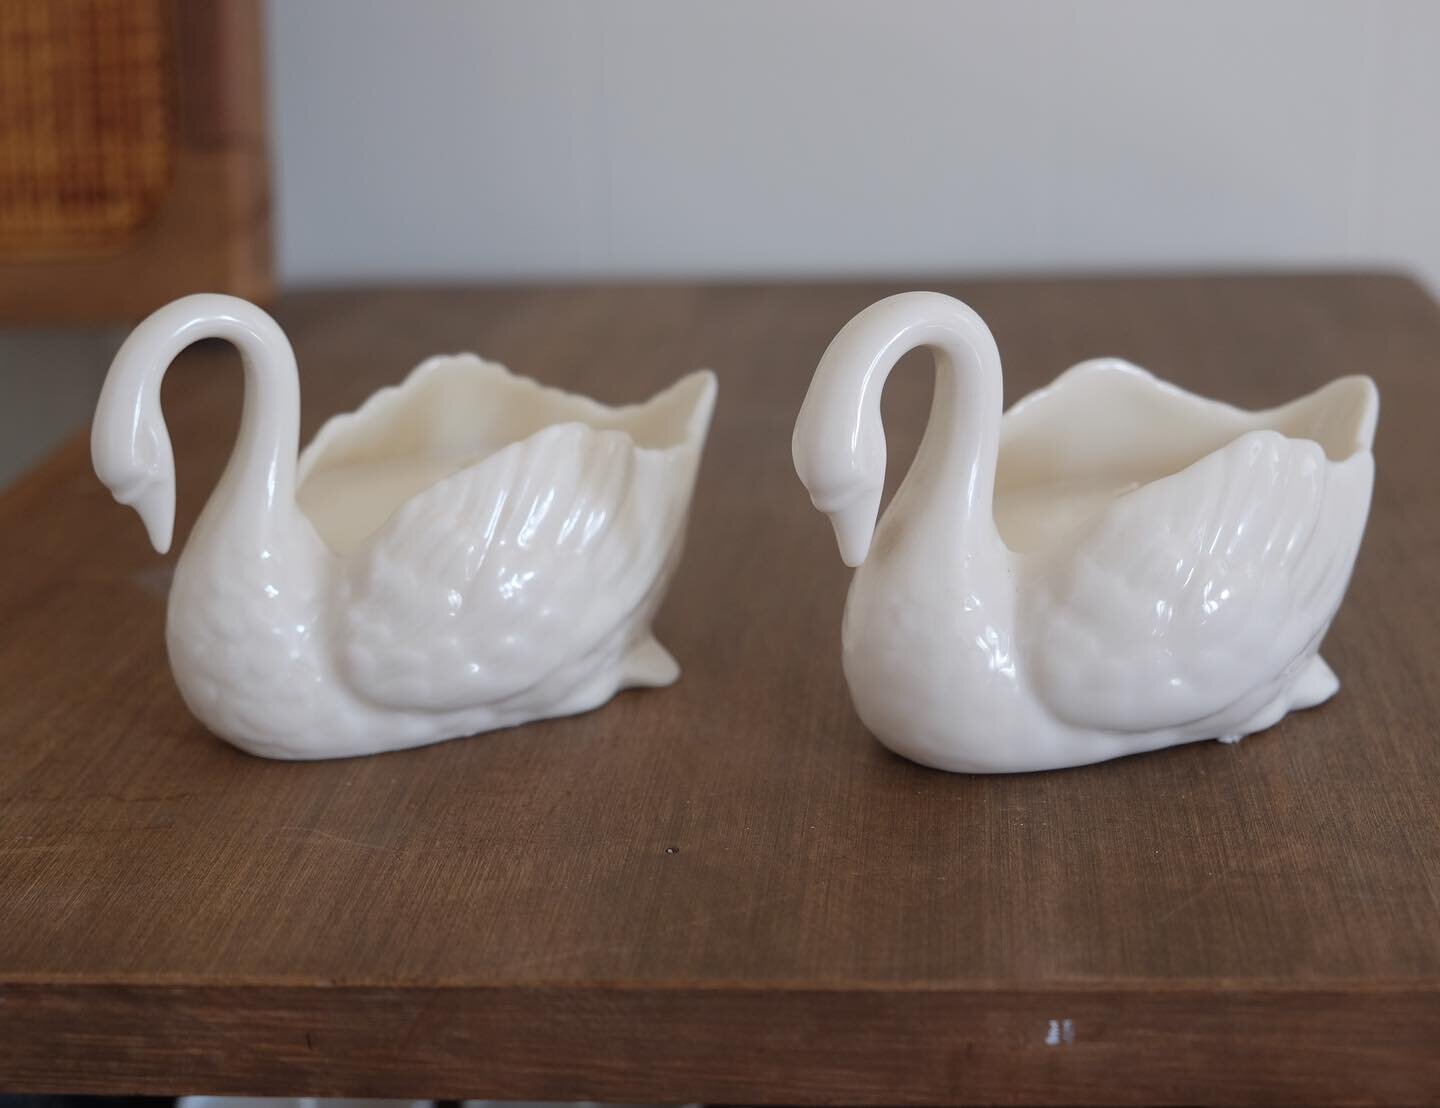 2 AVAILABLE - little white ceramic swans! $14 each plus shipping. Comment SOLD to claim! #sollysundriesavail